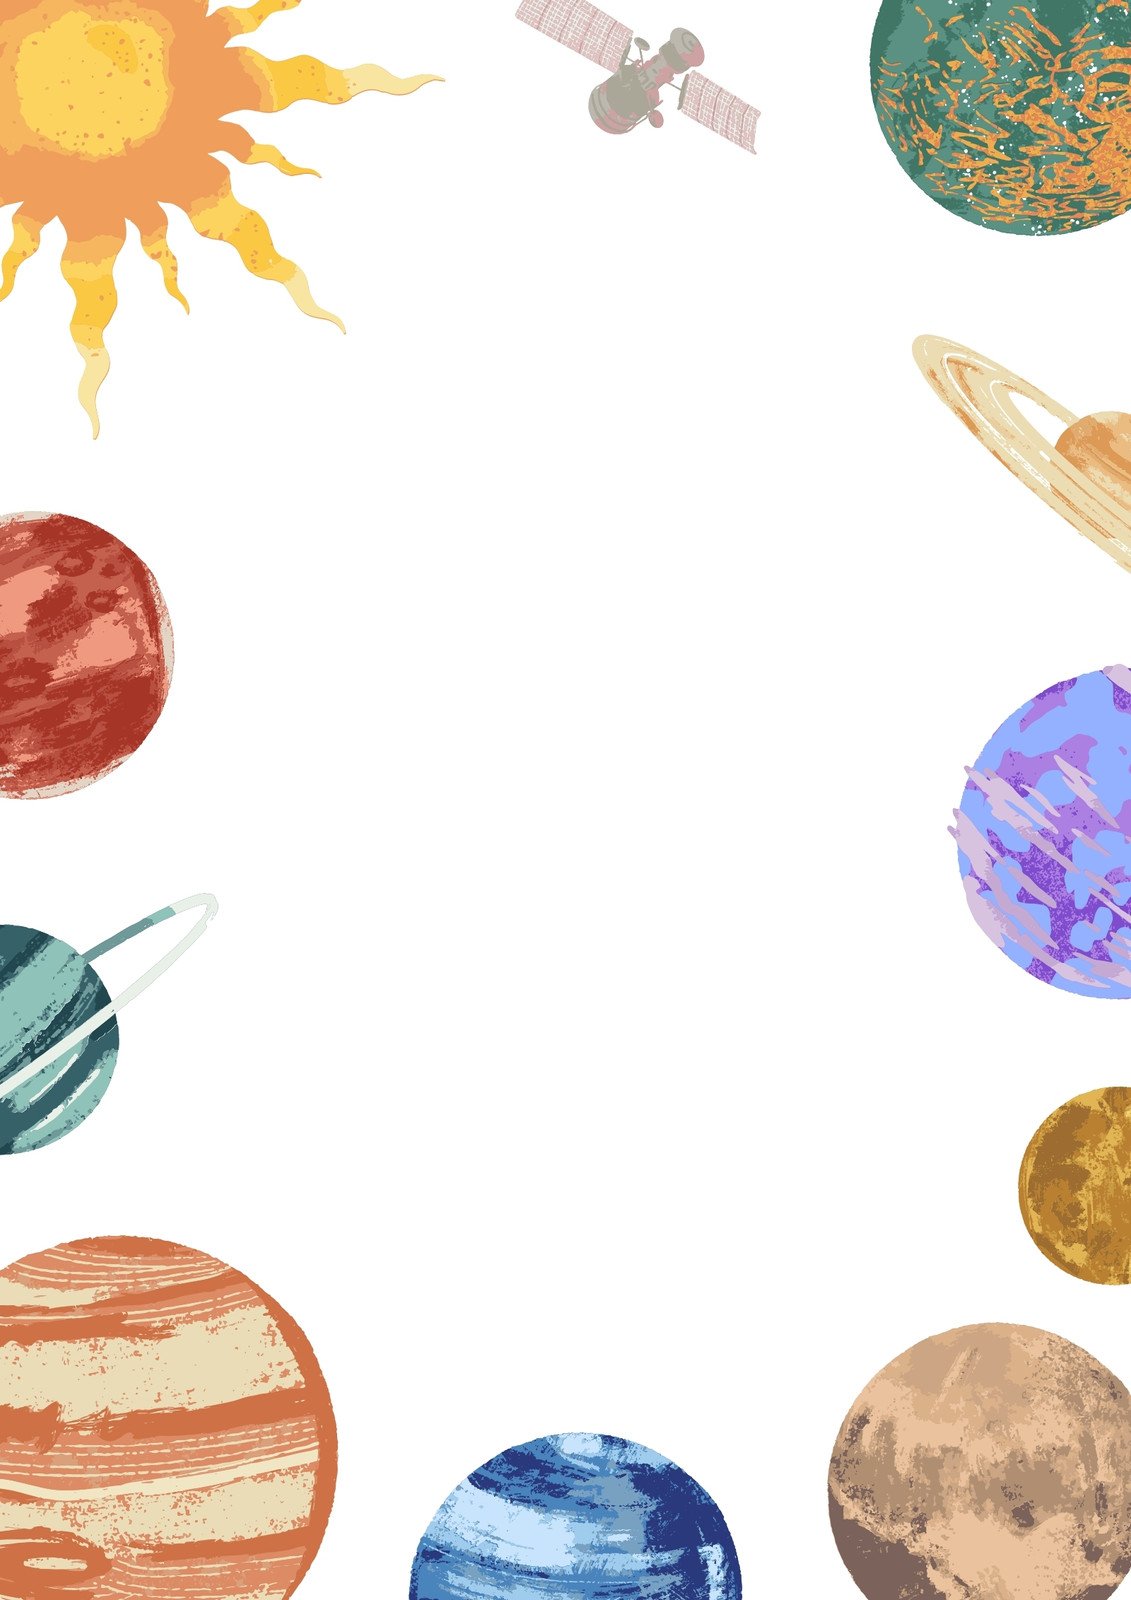 solar system backgrounds for powerpoint